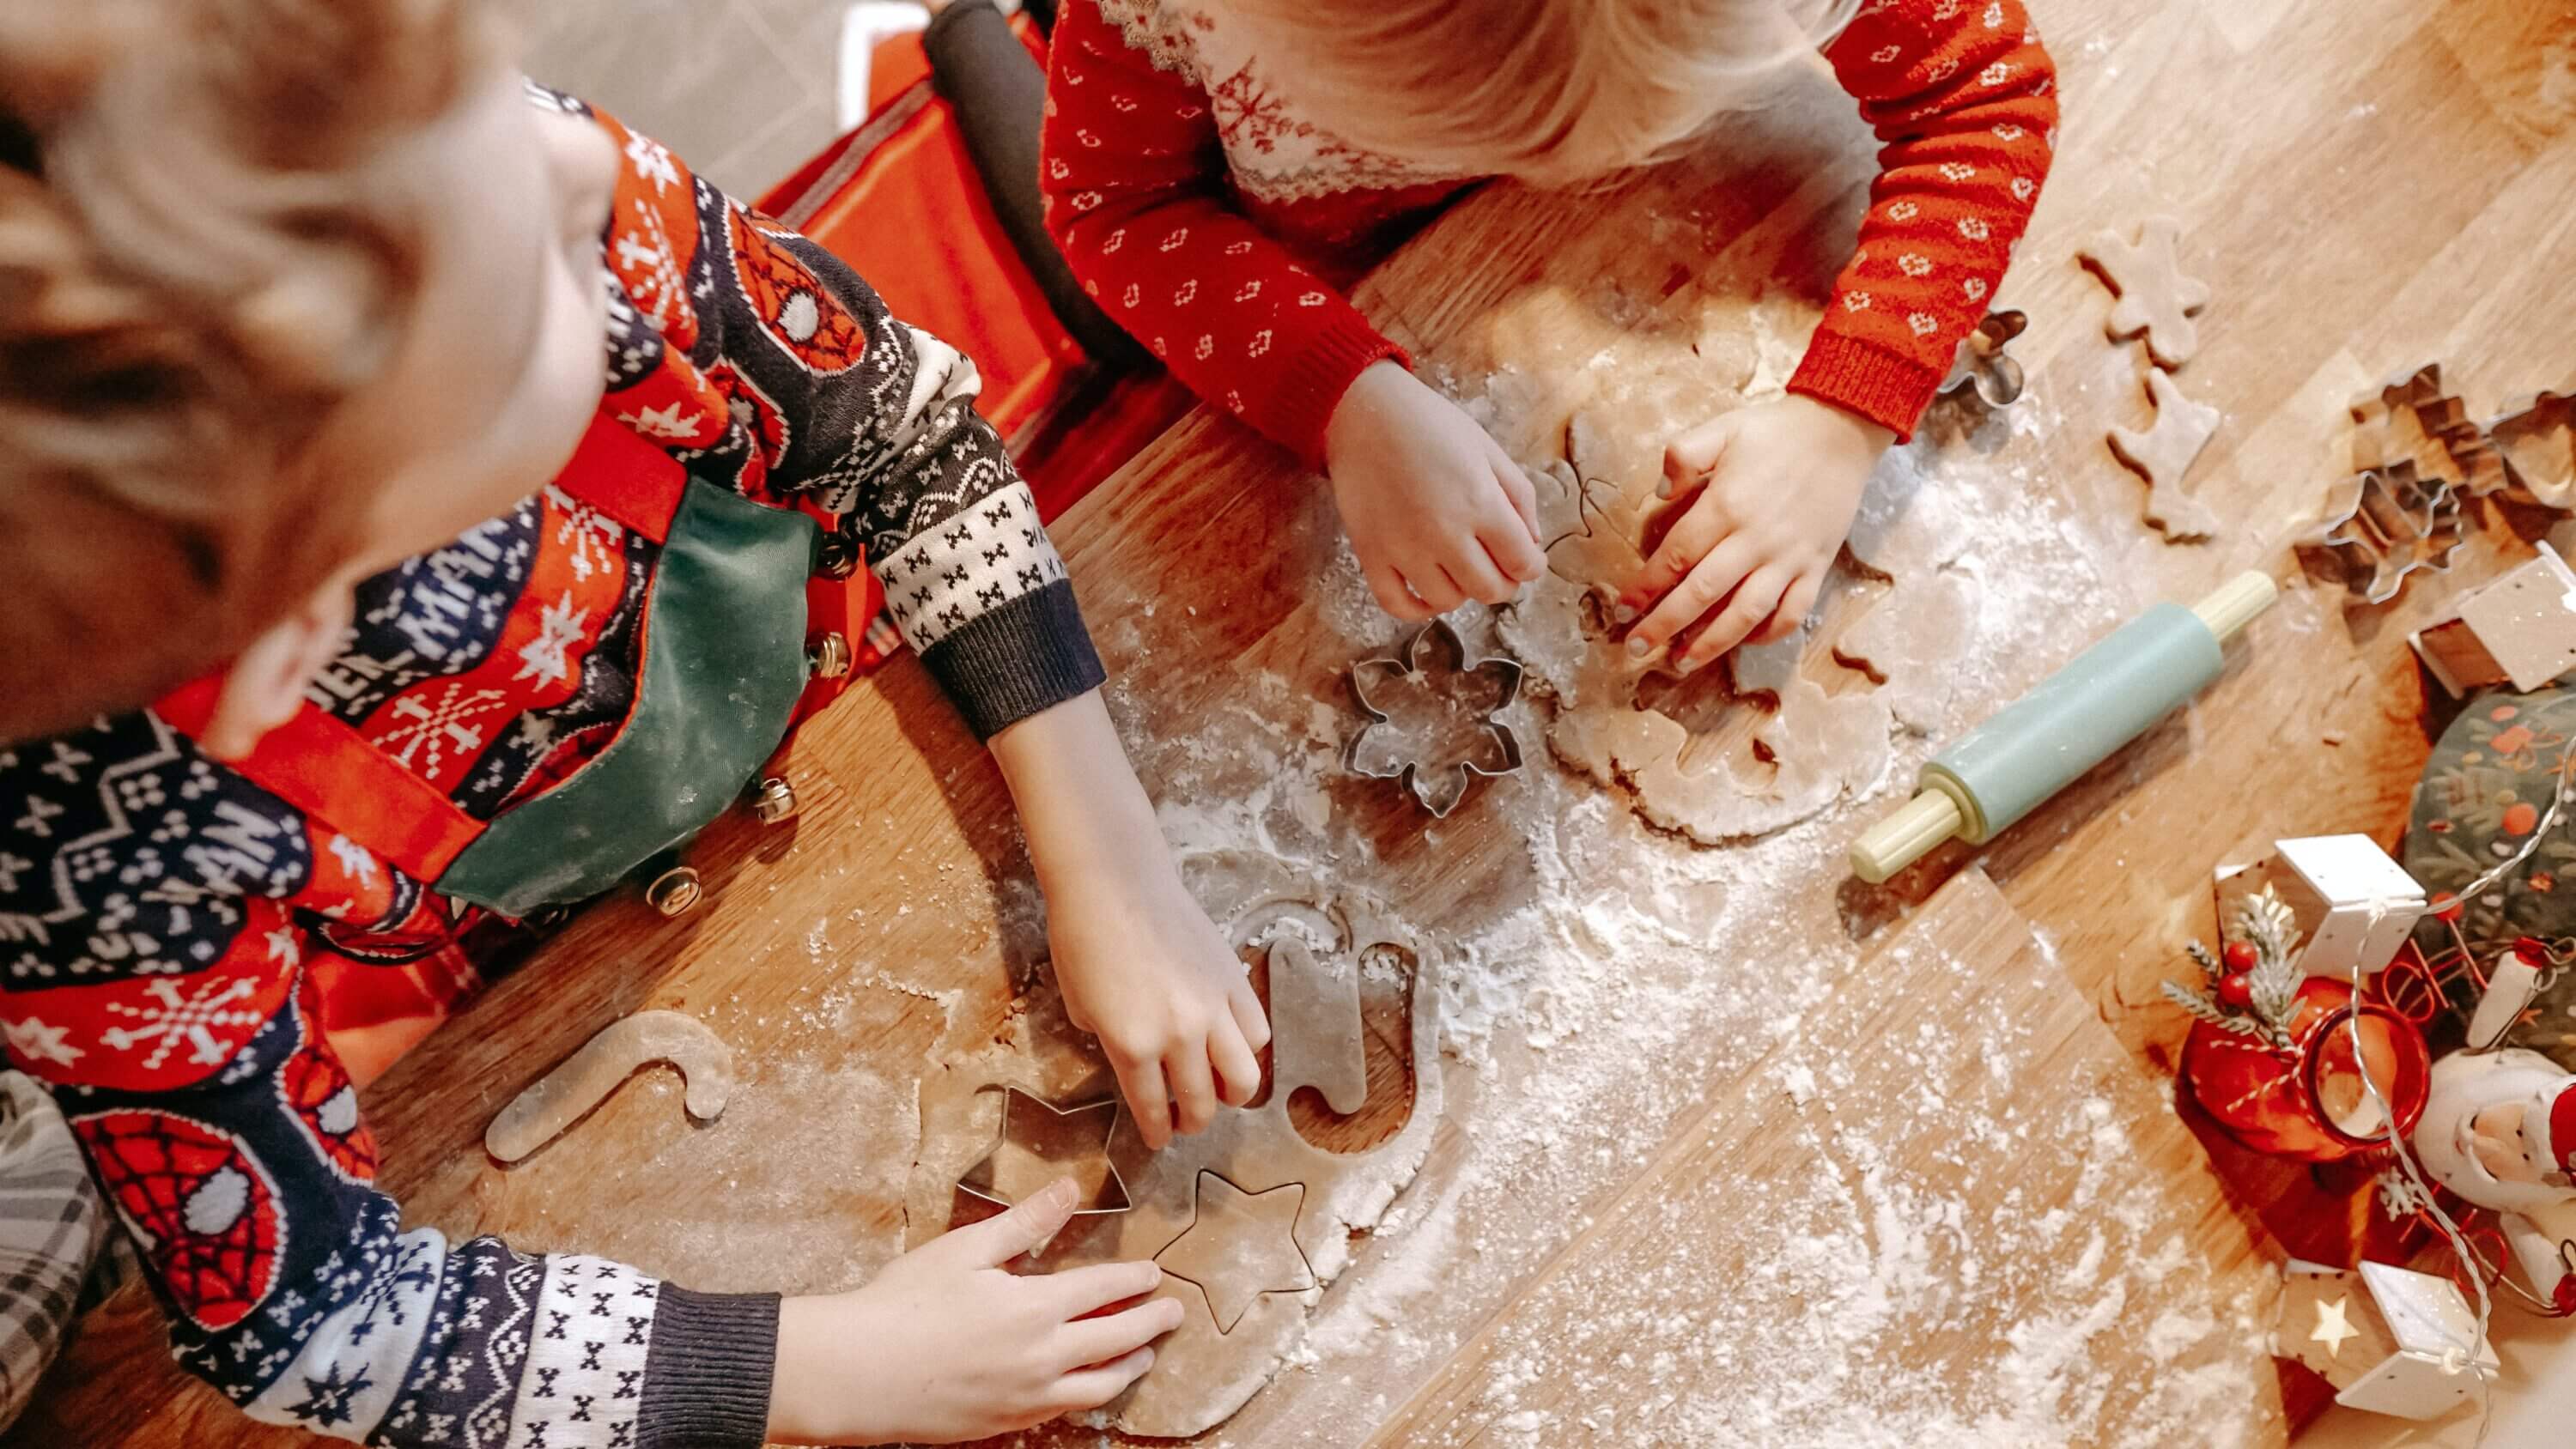 Two children use cookie cutters and a rolling pin to make holiday cookie cutouts.